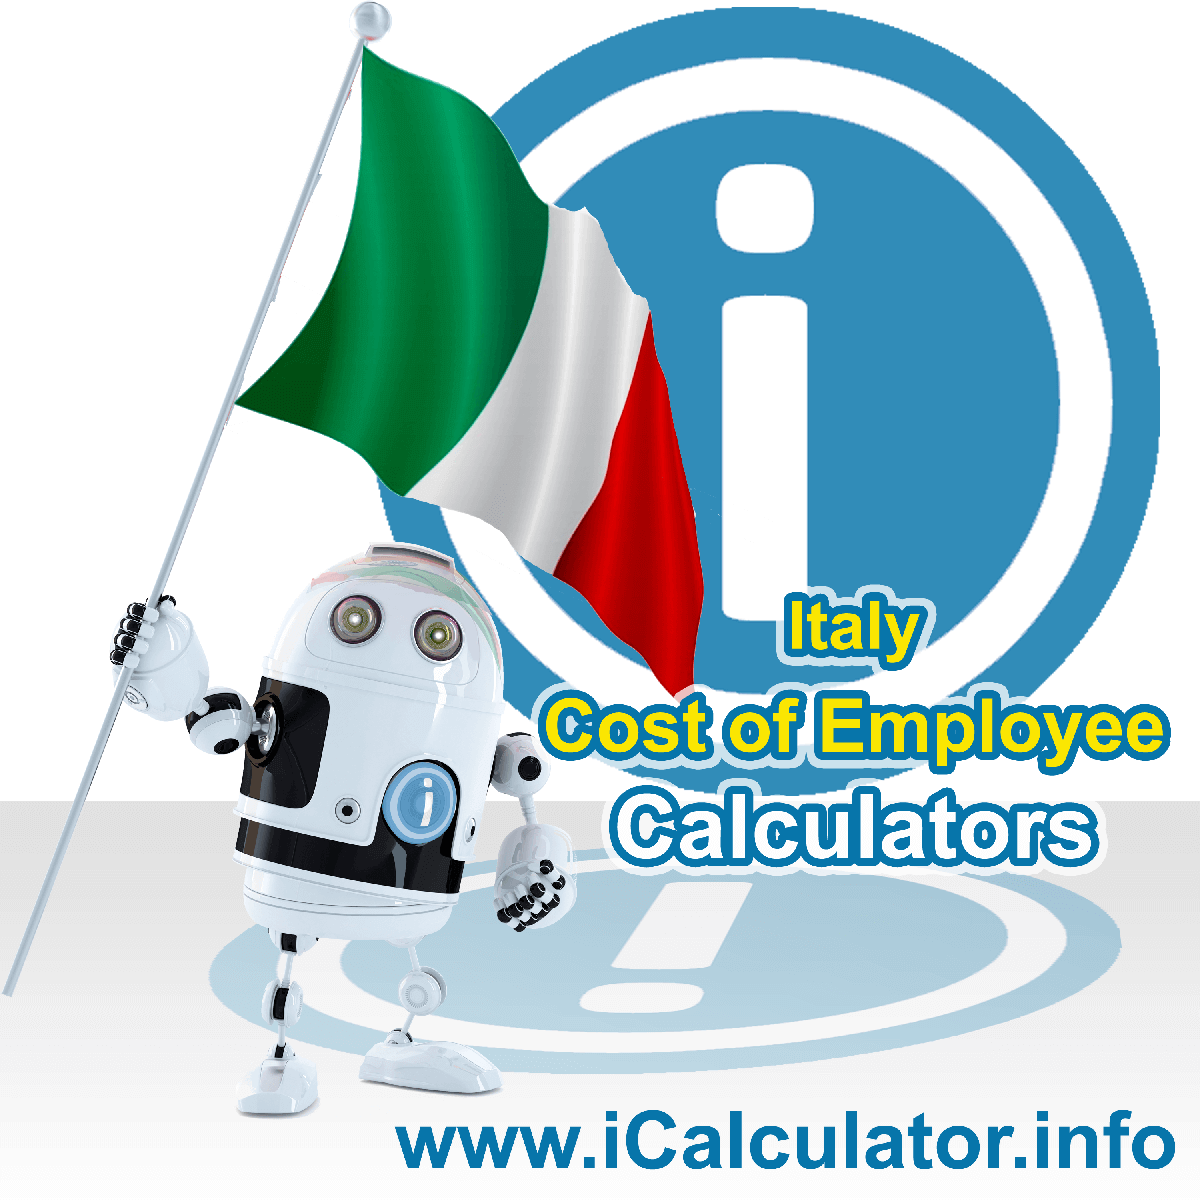 Italy Payroll Calculator. This image shows a new employer in Italy looking at payroll and human resource services in Italy as they want to hire an employee in Italy but are not sure of the employment costs. So, they make use of the Italy payroll calculator to understand their employment cost in Italy in 2022